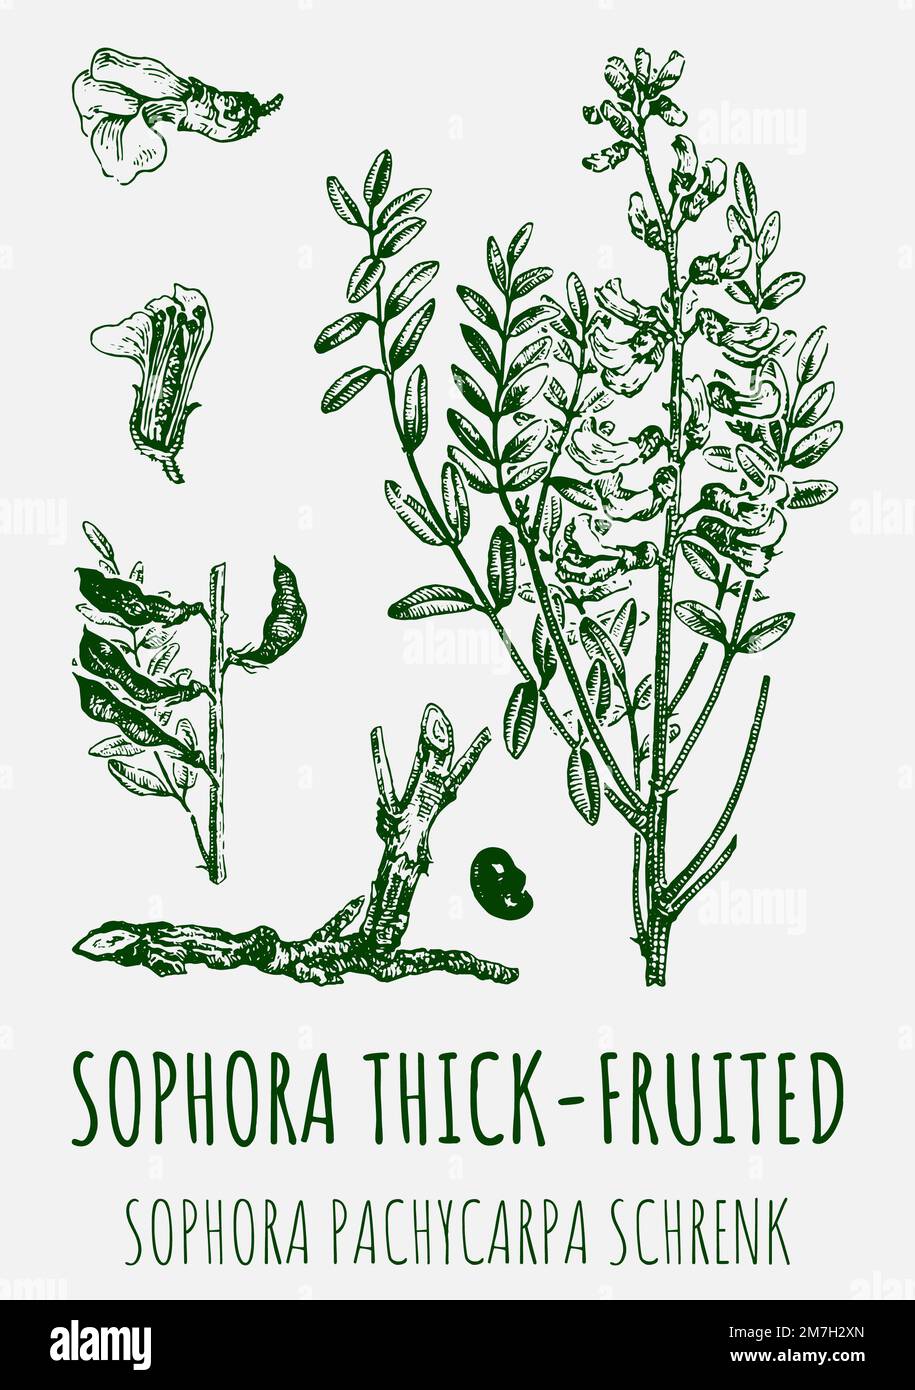 Drawings of Sophora thick-fruited. Hand drawn illustration. Latin name SOPHORA PACHYCARPA. Stock Photo